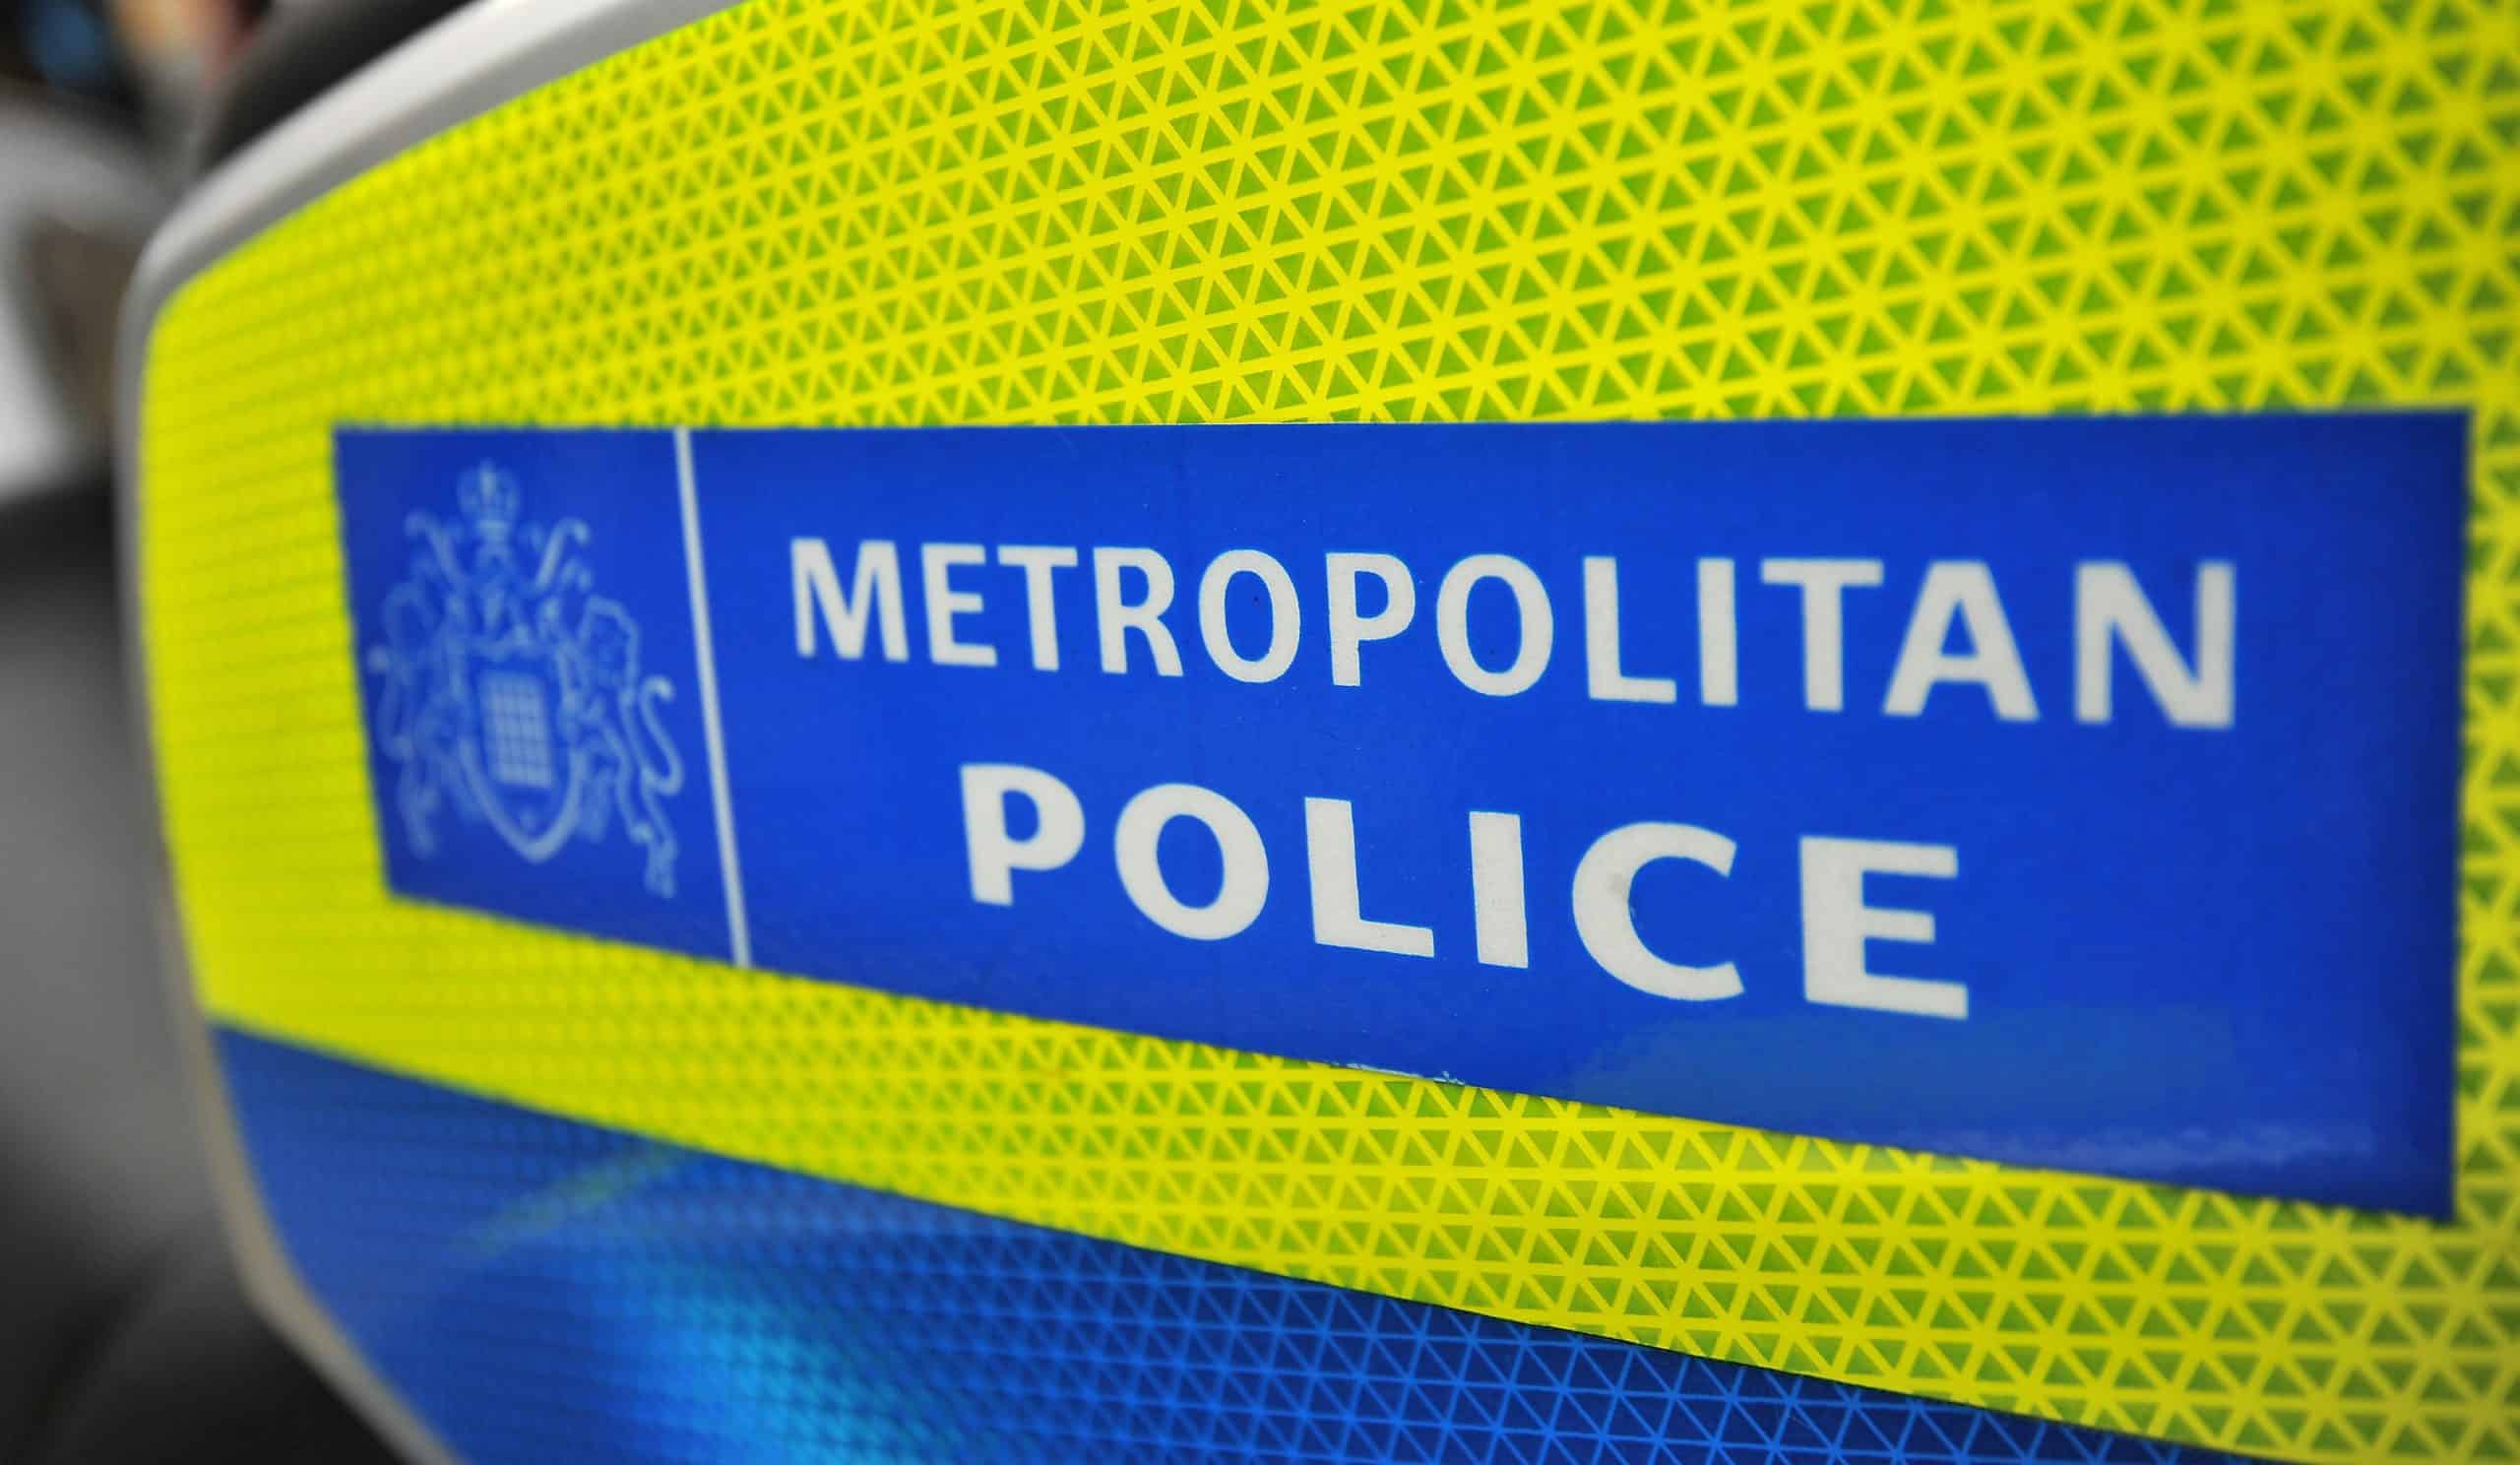 Met Police officer charged with sexually assaulting colleague on duty